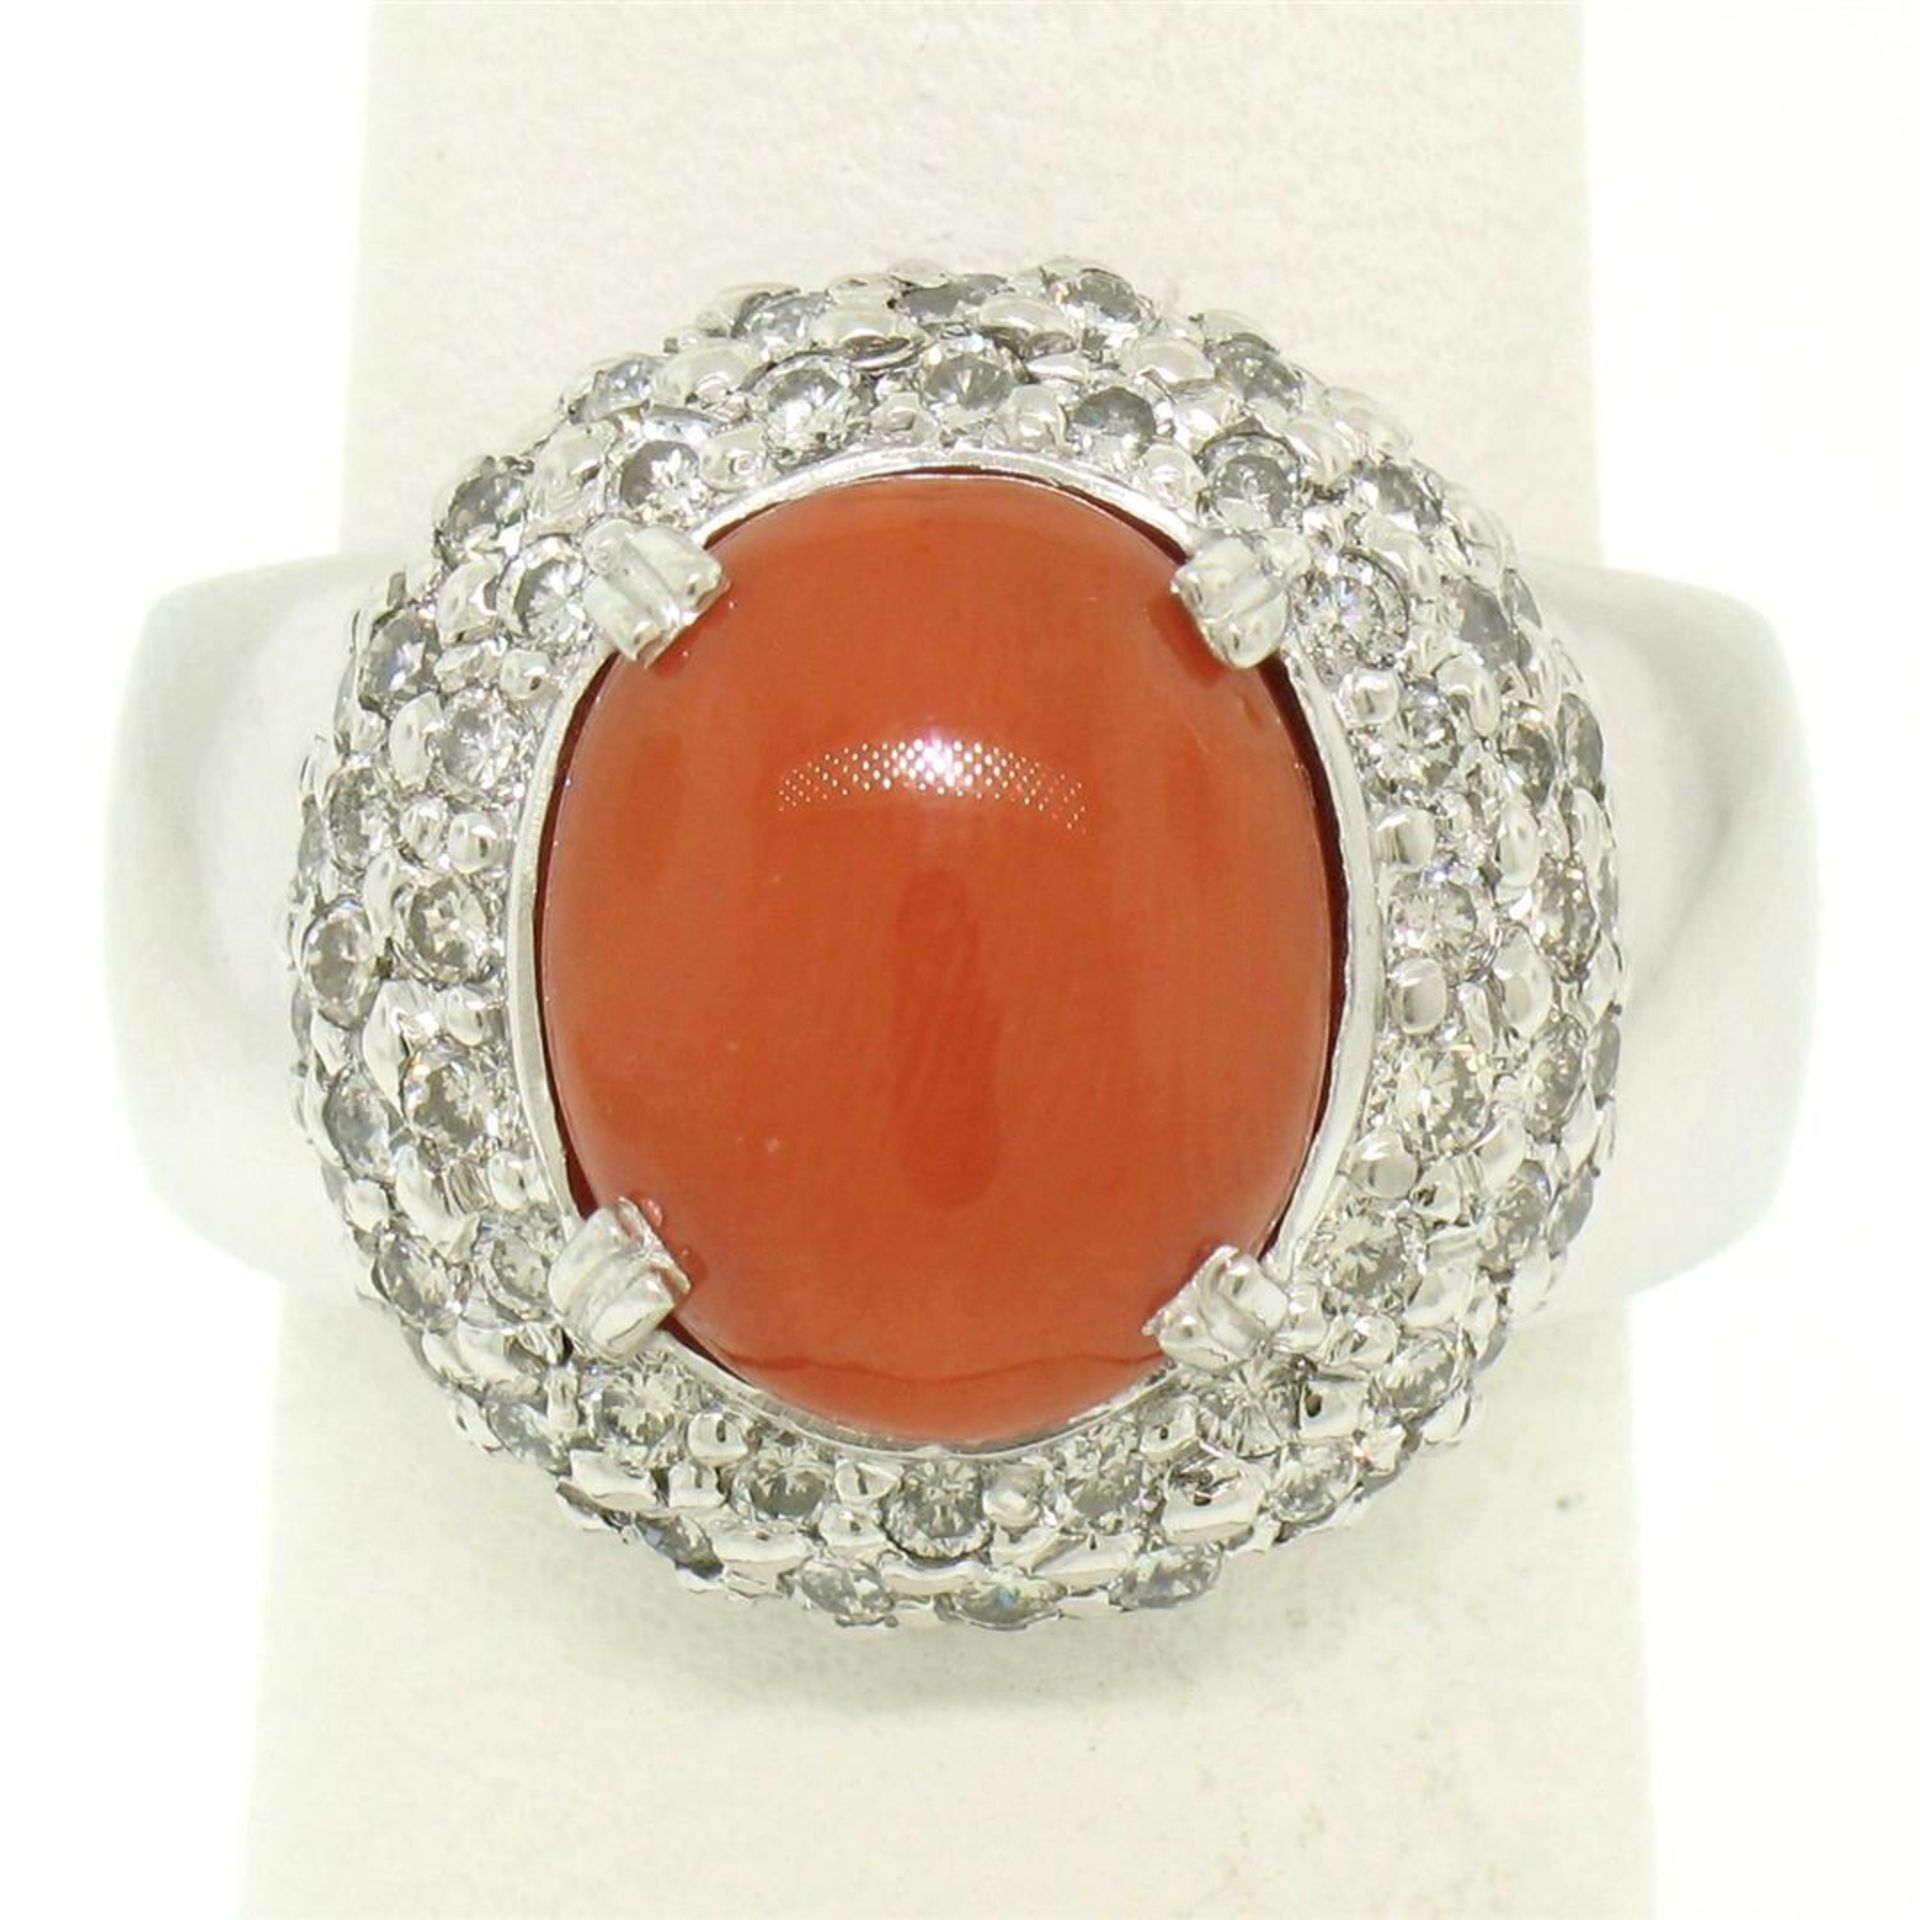 14kt White Gold Oval Cabochon Red Coral Ring w/ 2.10ctw Diamond Halo - Image 3 of 8